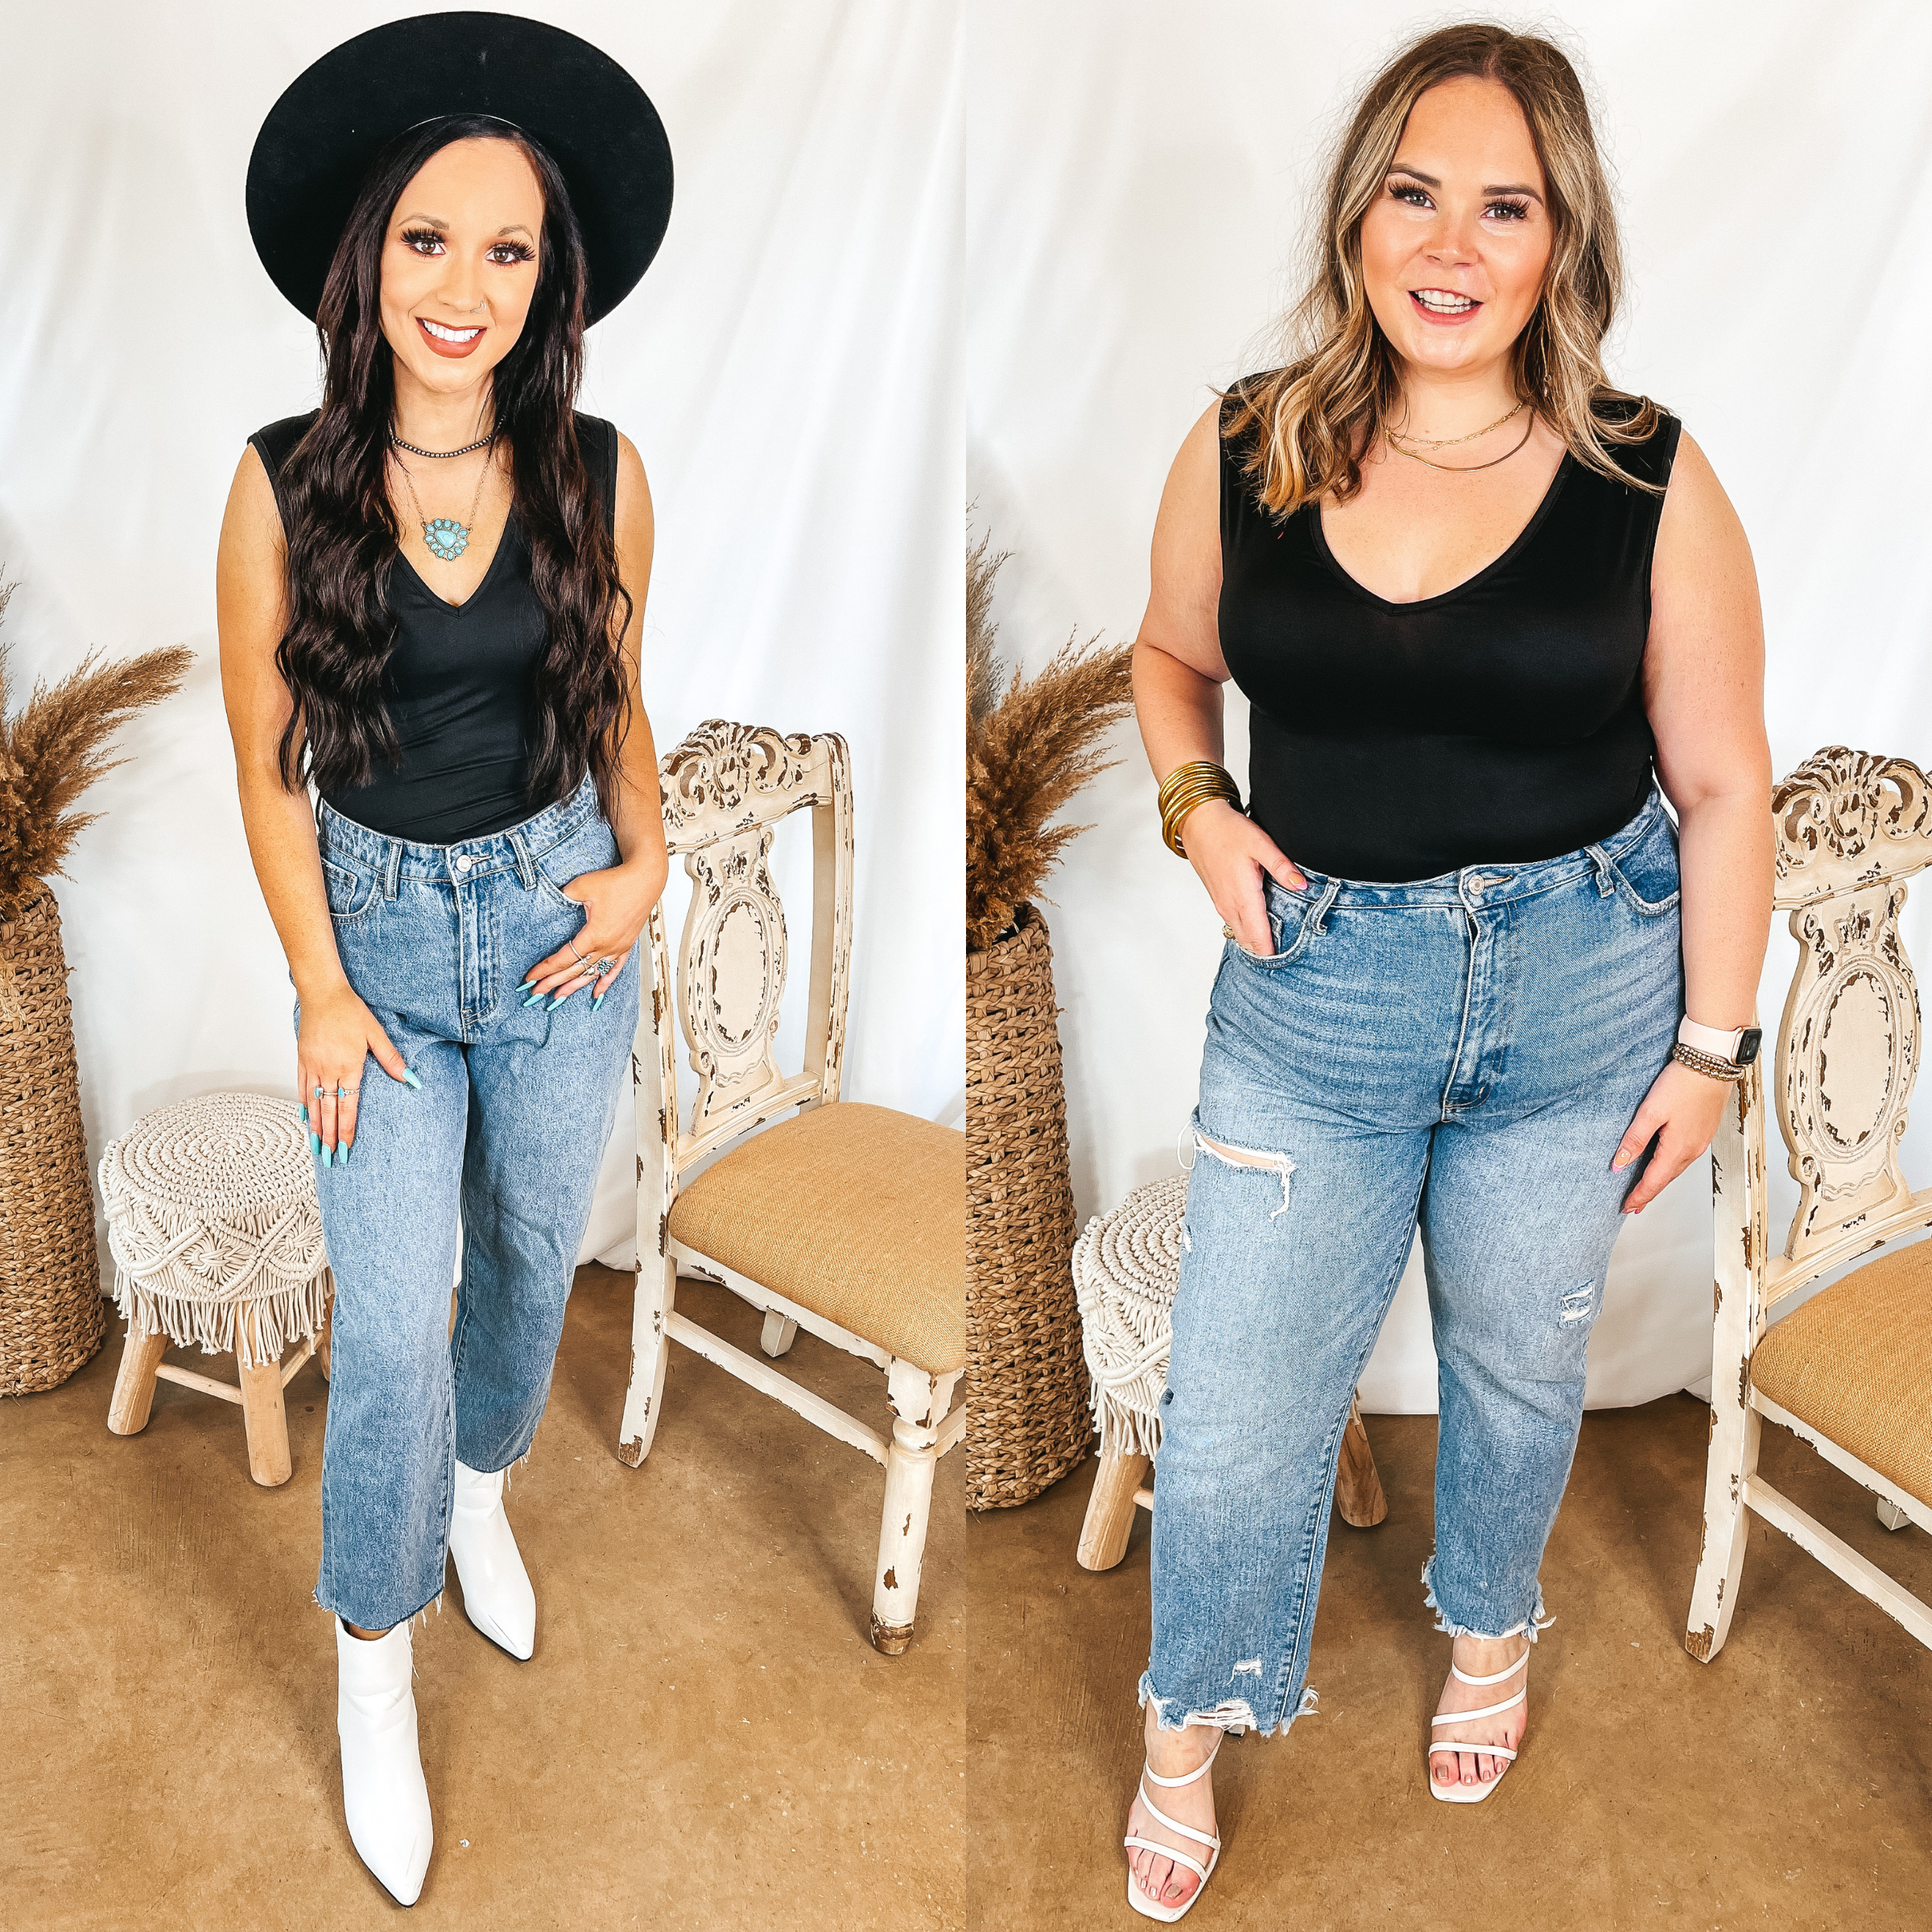 Models are wearing a black tank top bodysuit with a deep v neckline. Size small model has it paired with light wash jeans, white booties, and a black hat. Size large model has it paired with light wash jeans, strappy white heels, and gold jewelry.